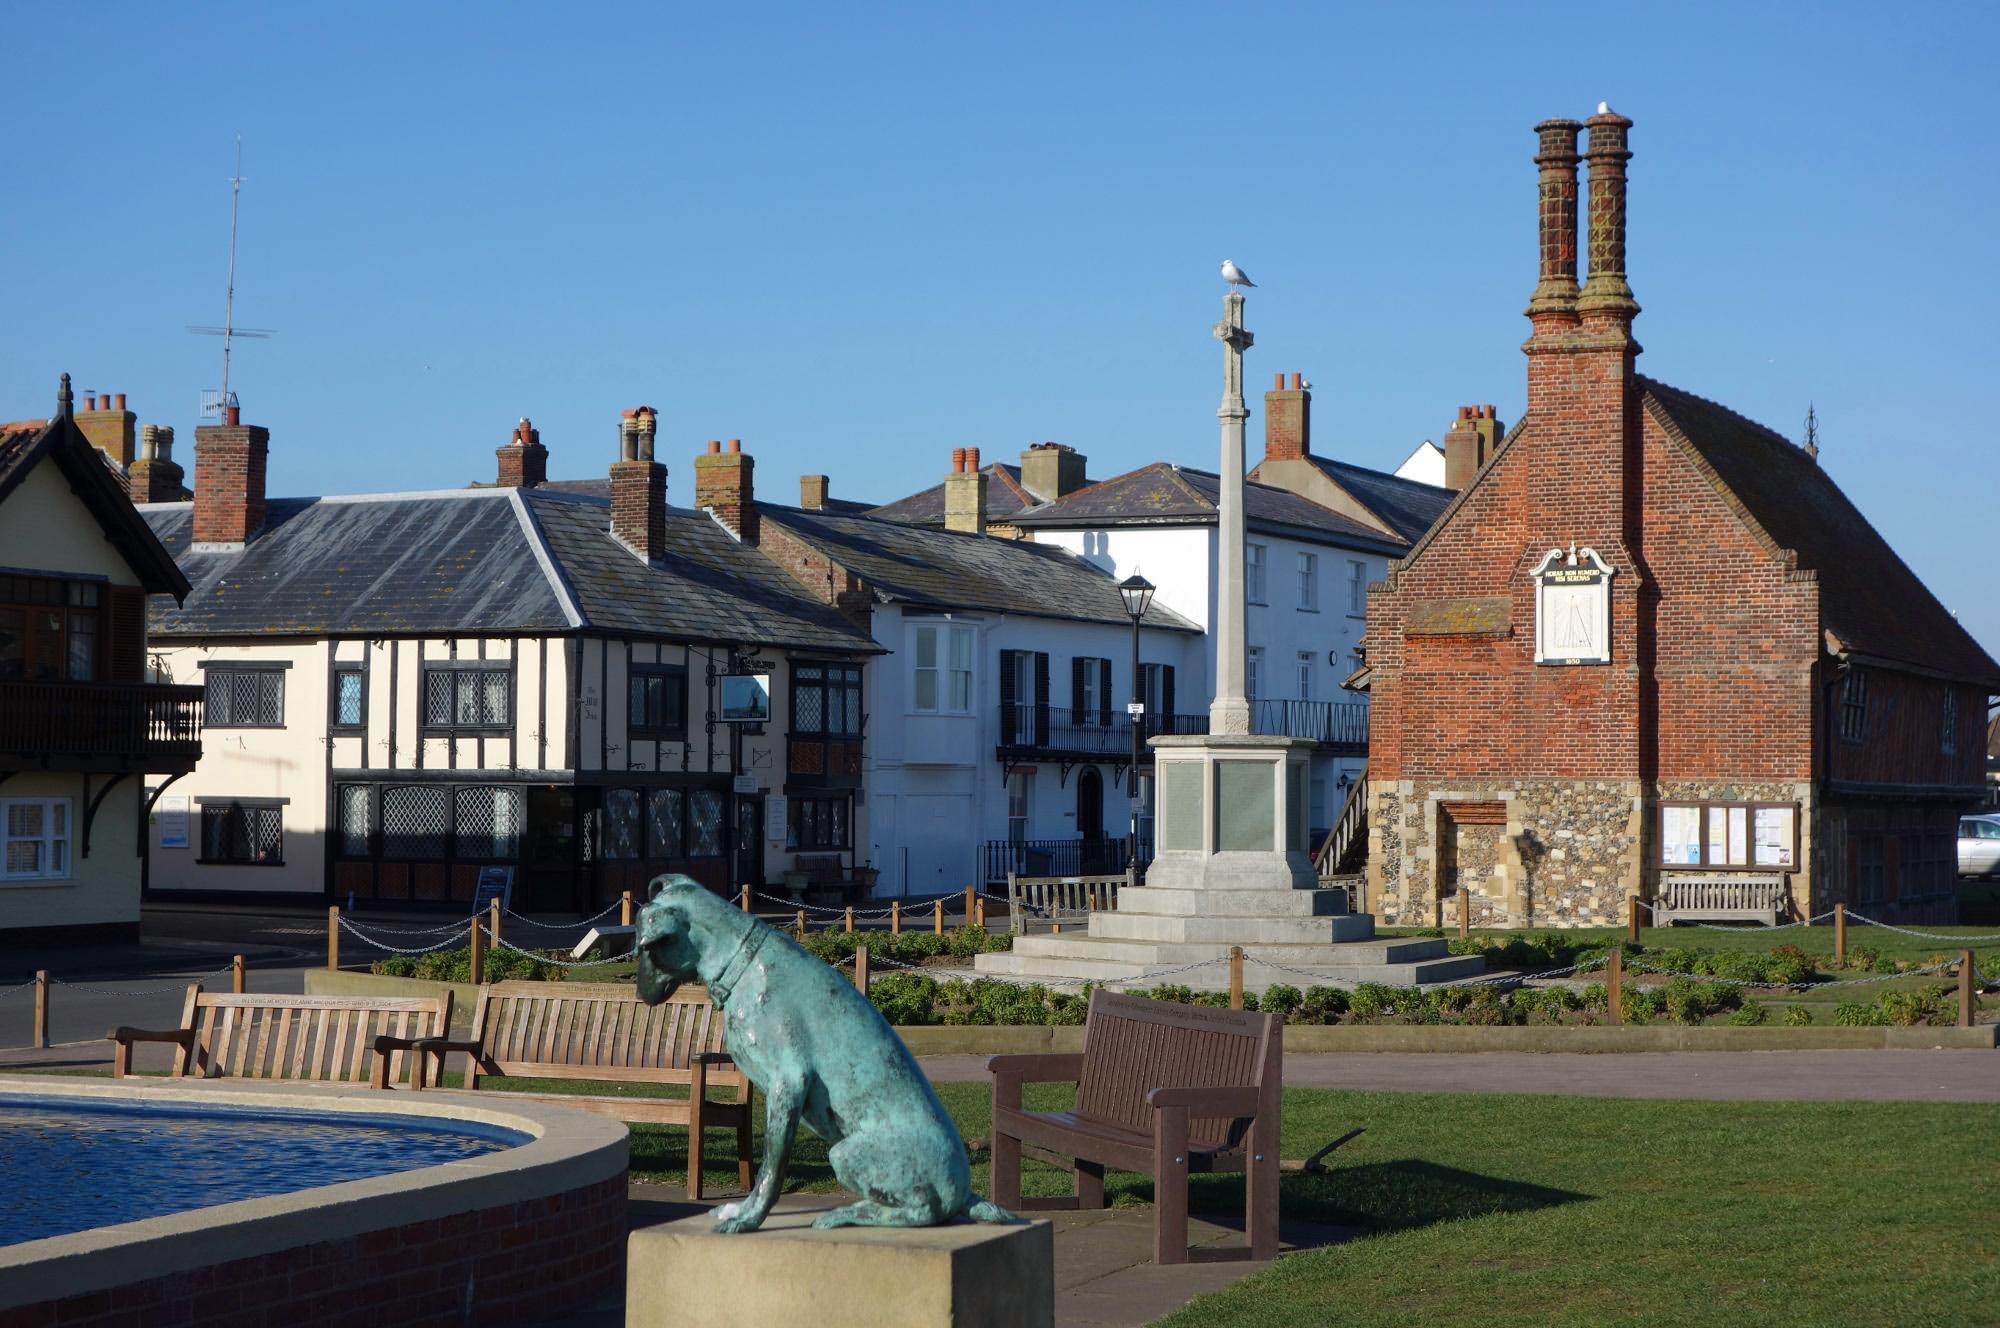 Snooks the dog, the Tudor Moot Hall, the war memorial, the pub and model yacht pond in the centre of Aldeburgh